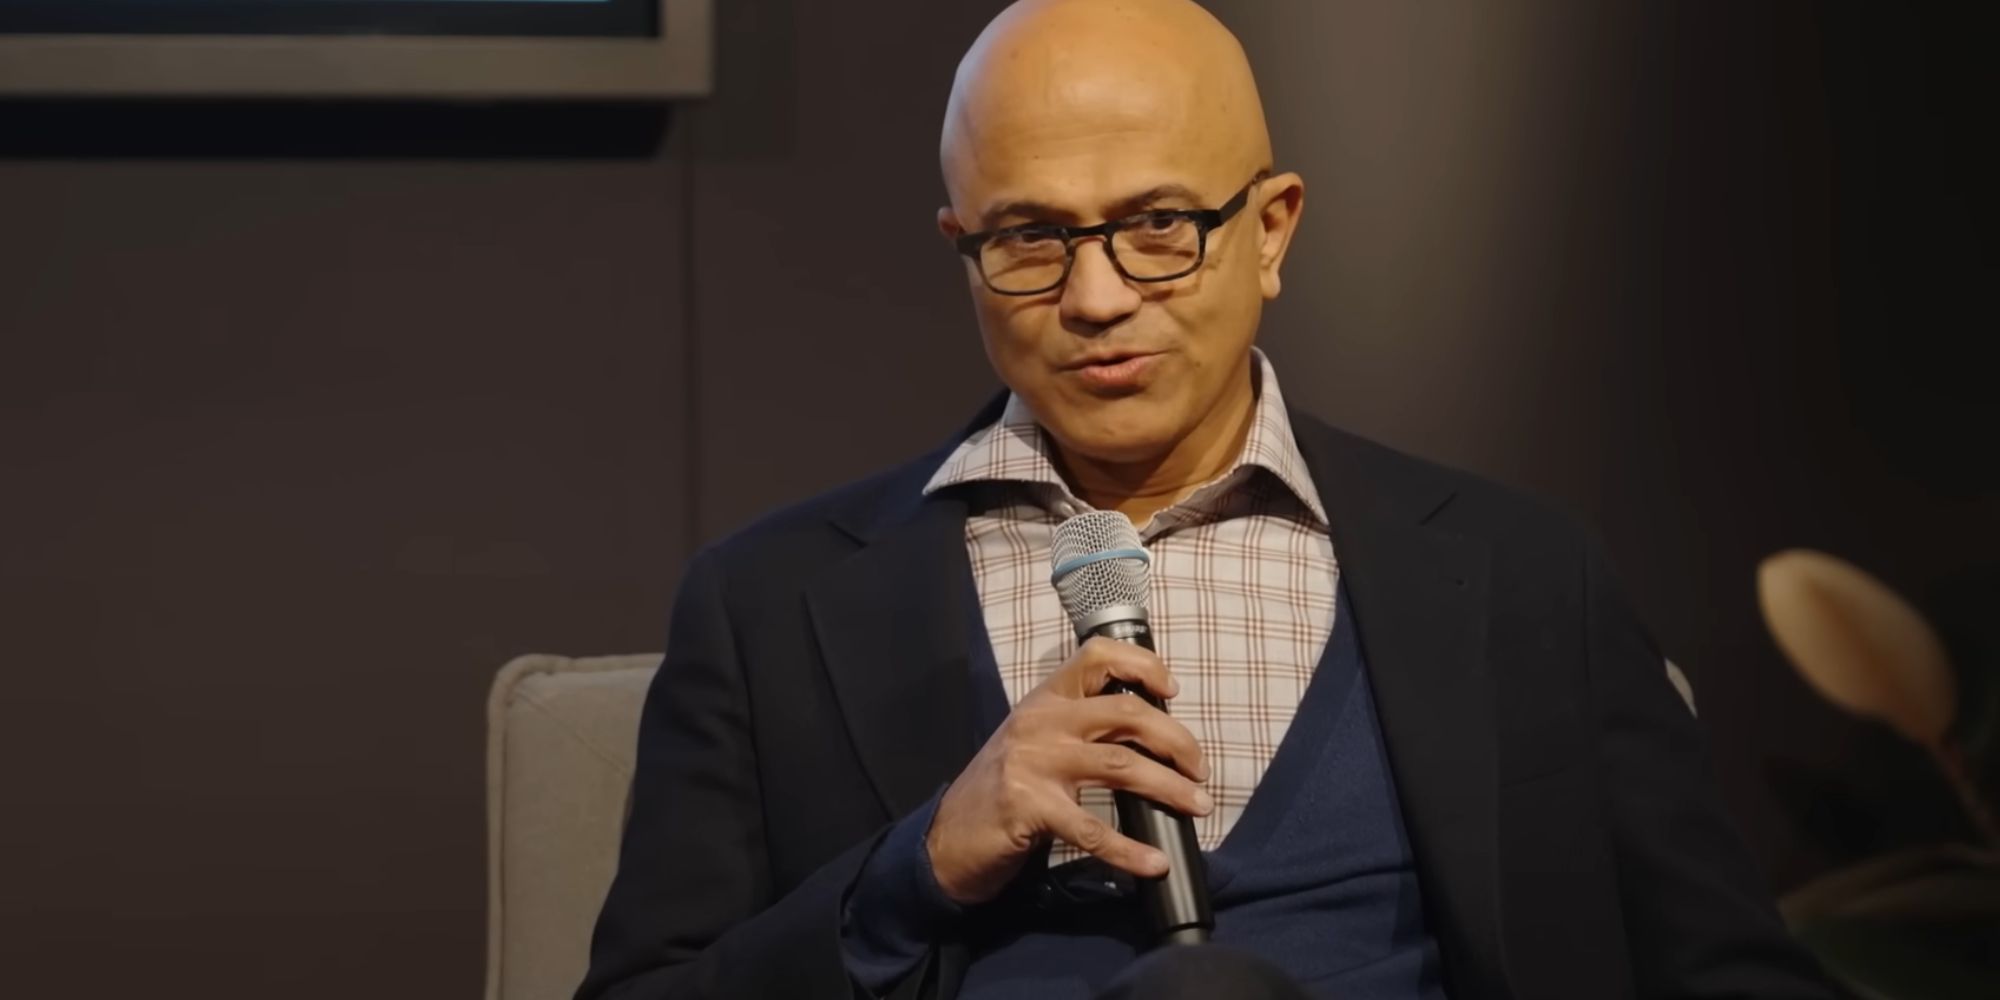 Microsoft CEO Satya Nadella being interviewed, holding a microphone